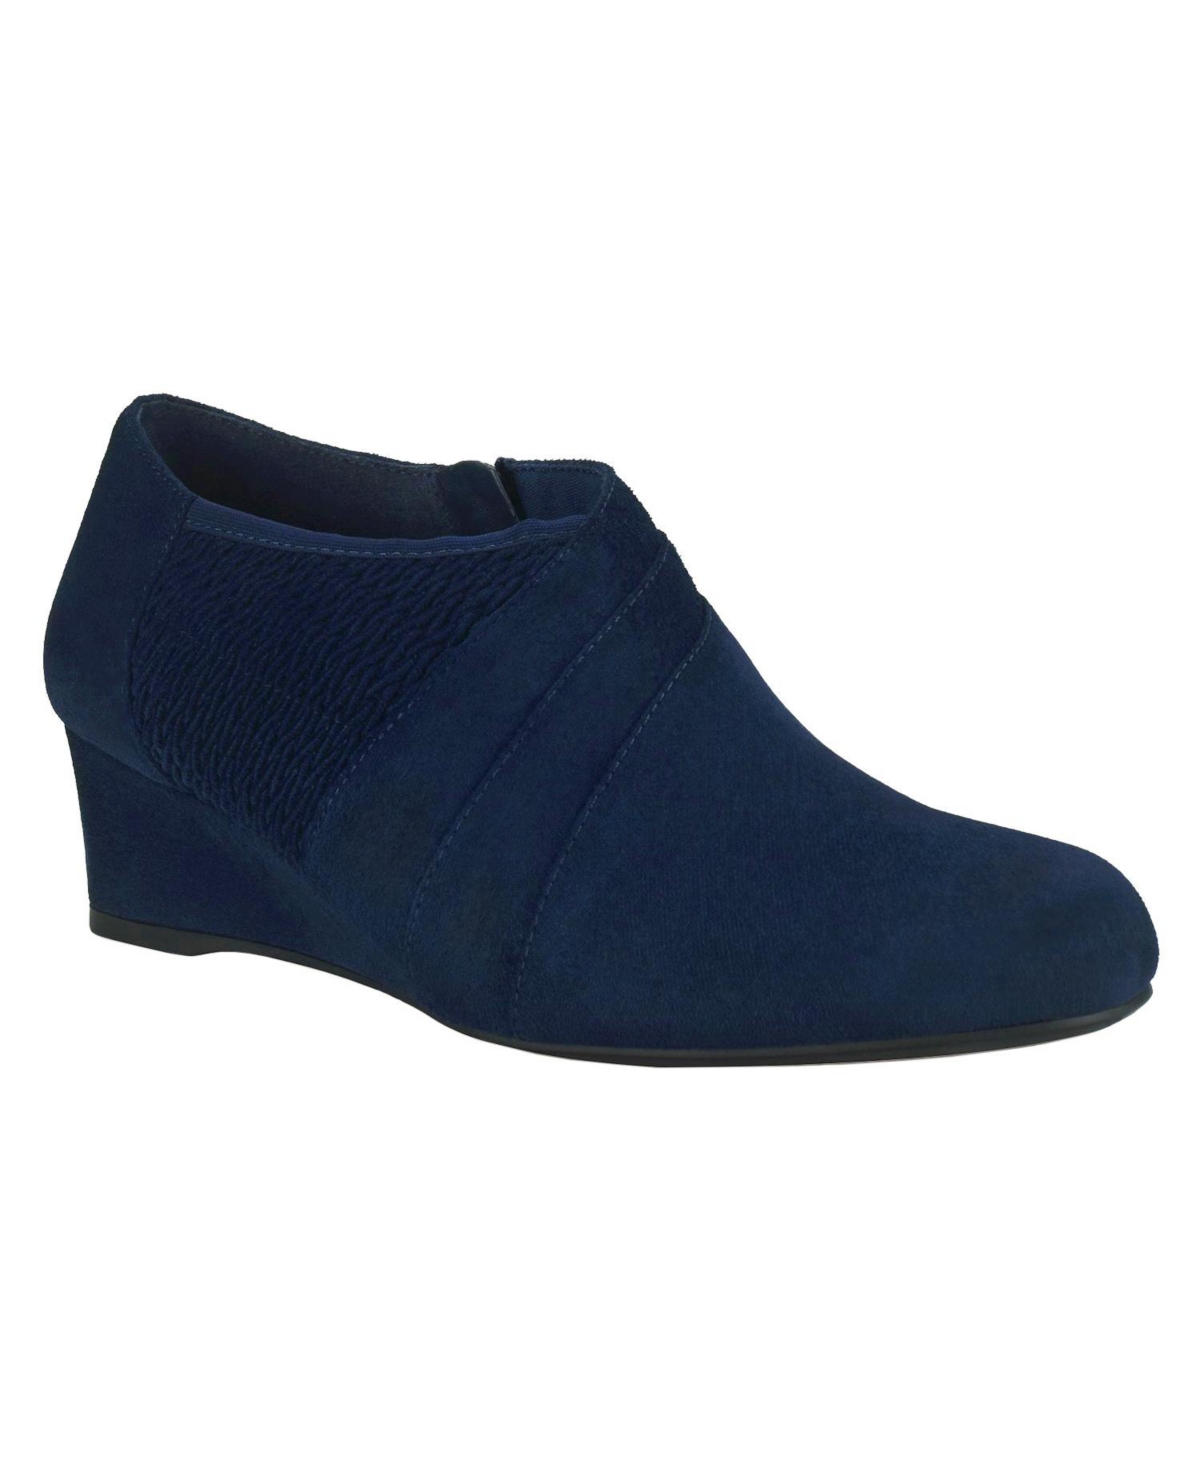 Women's Ginger Stretch Wedge Shooties - Midnight Blue